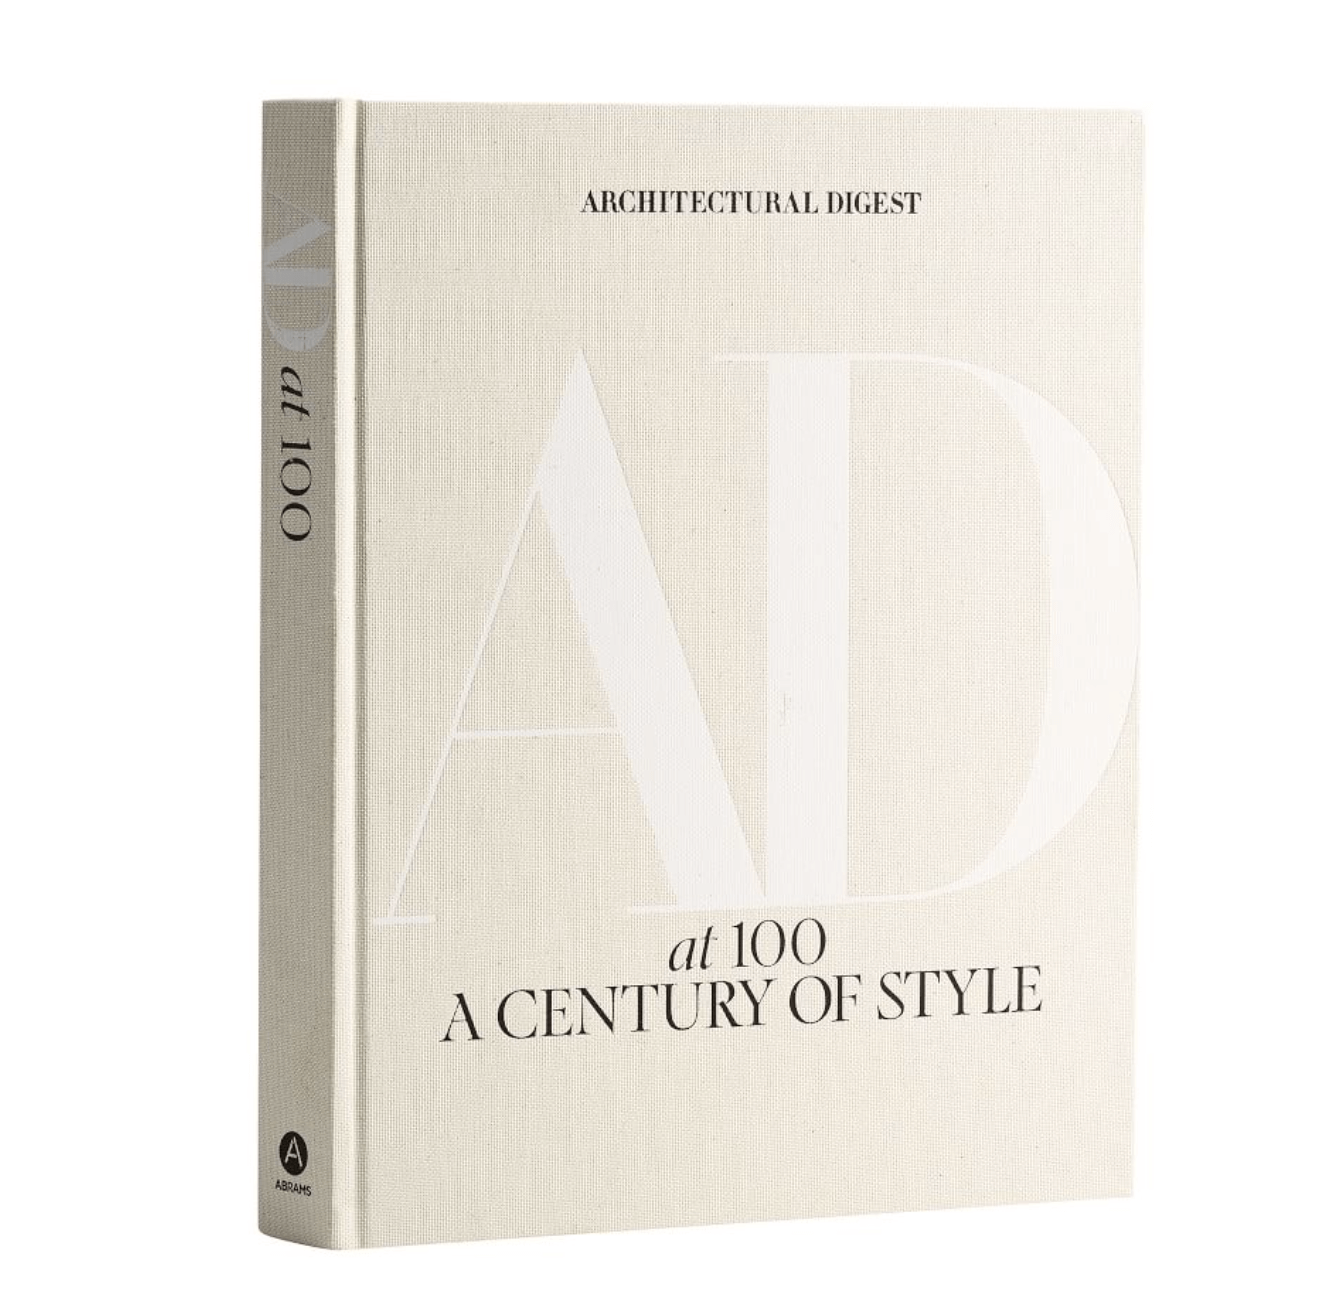 Architectural Digest at 100: A Century of Style - Coffee table book